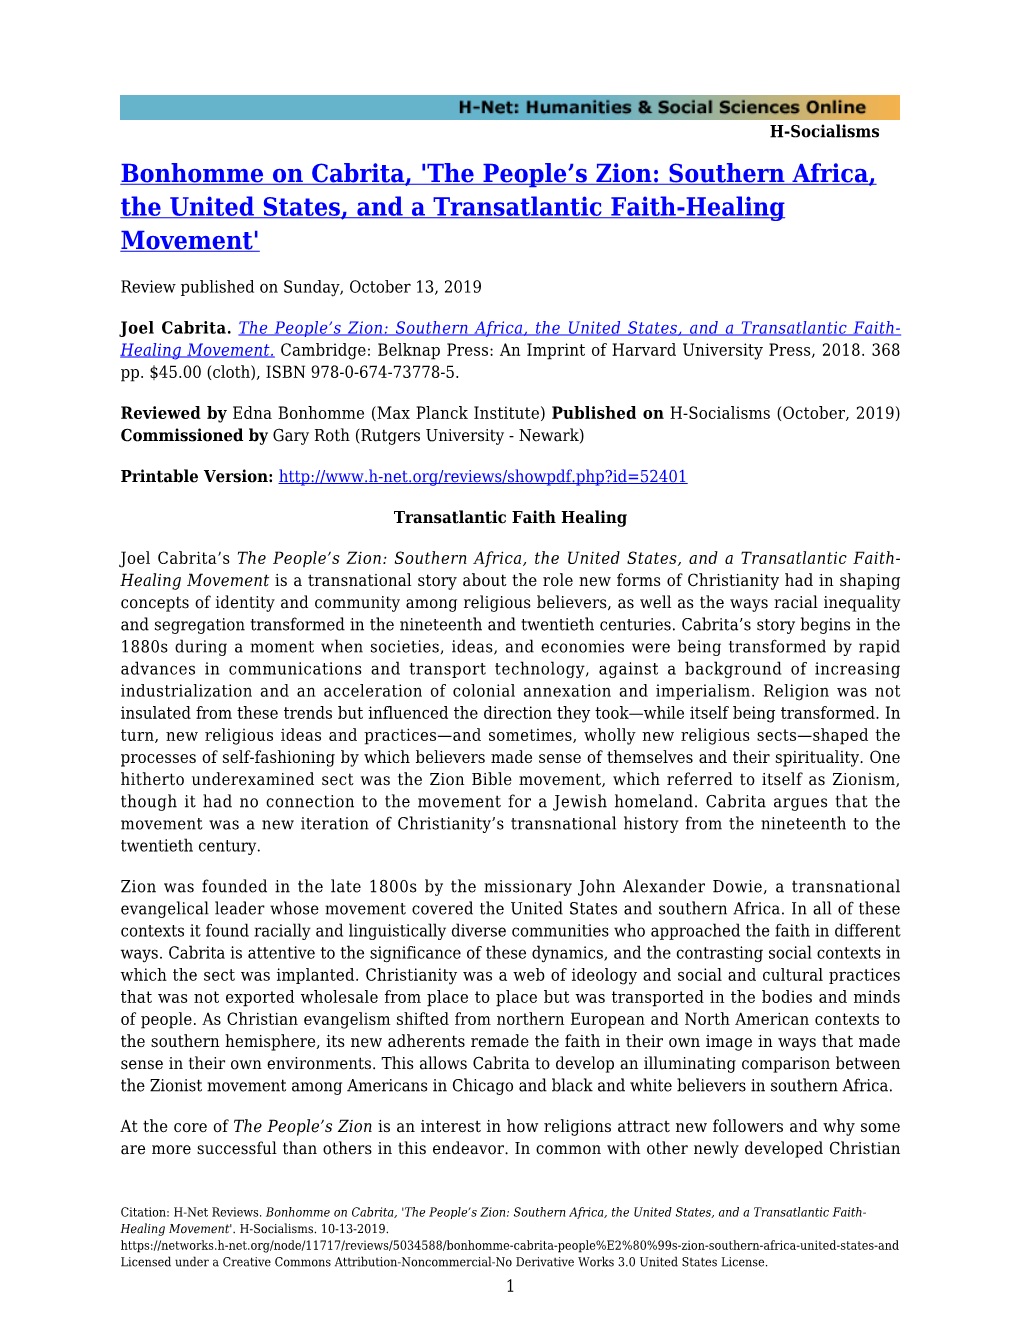 'The People's Zion: Southern Africa, the United States, and A